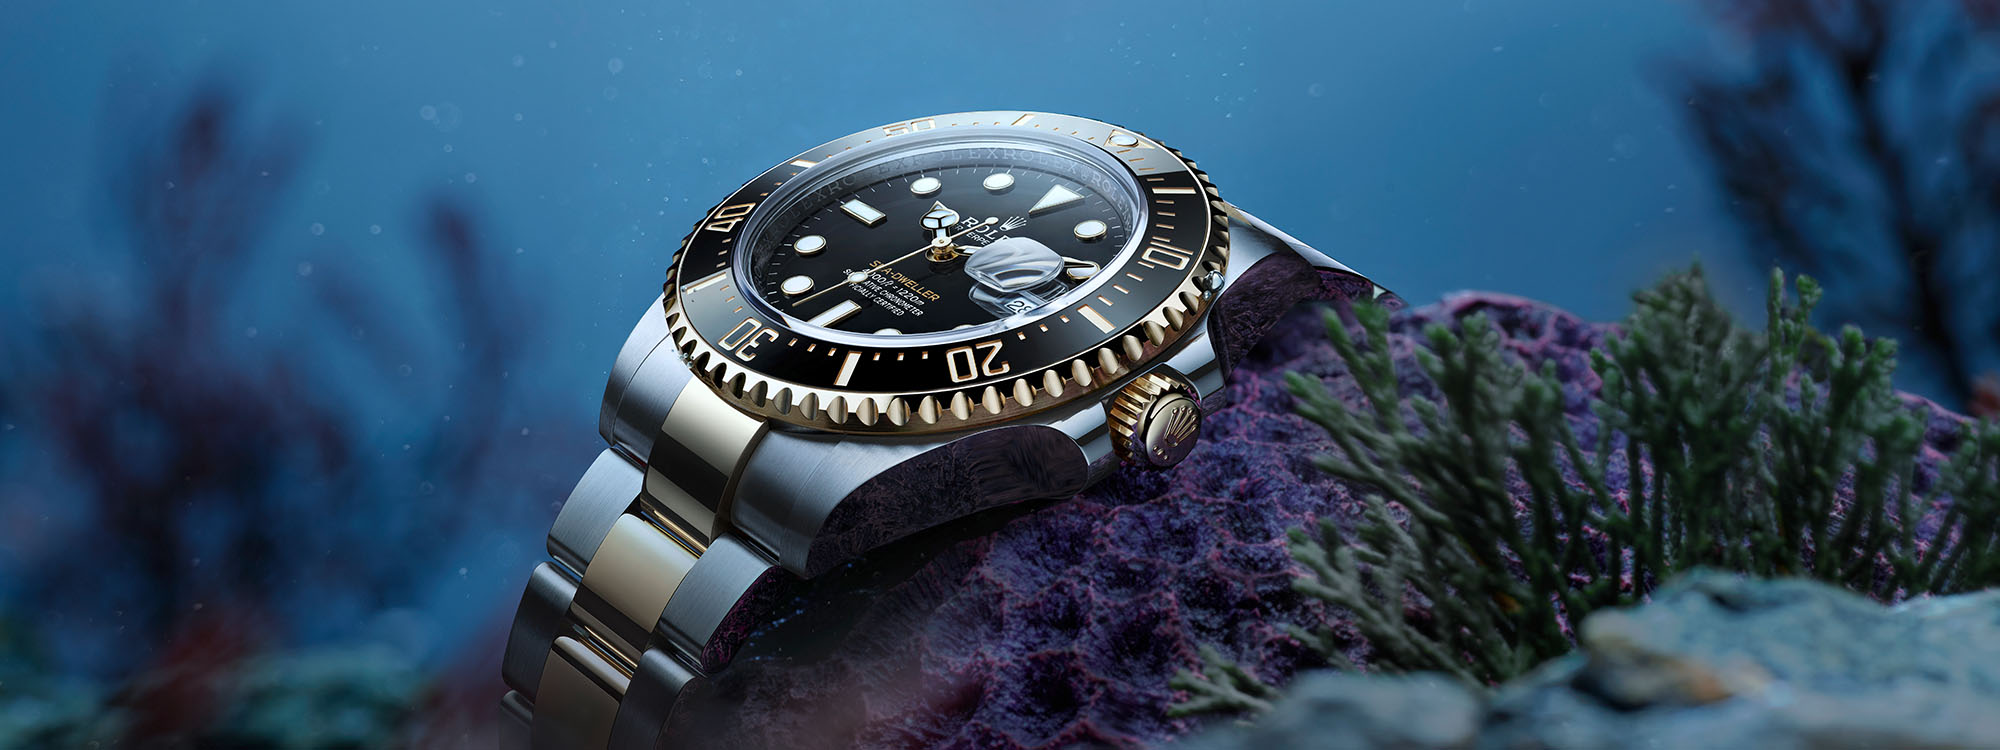 Sea-Dweller vs. Submariner: Exploring the Evolution of Rolex Dive Watches